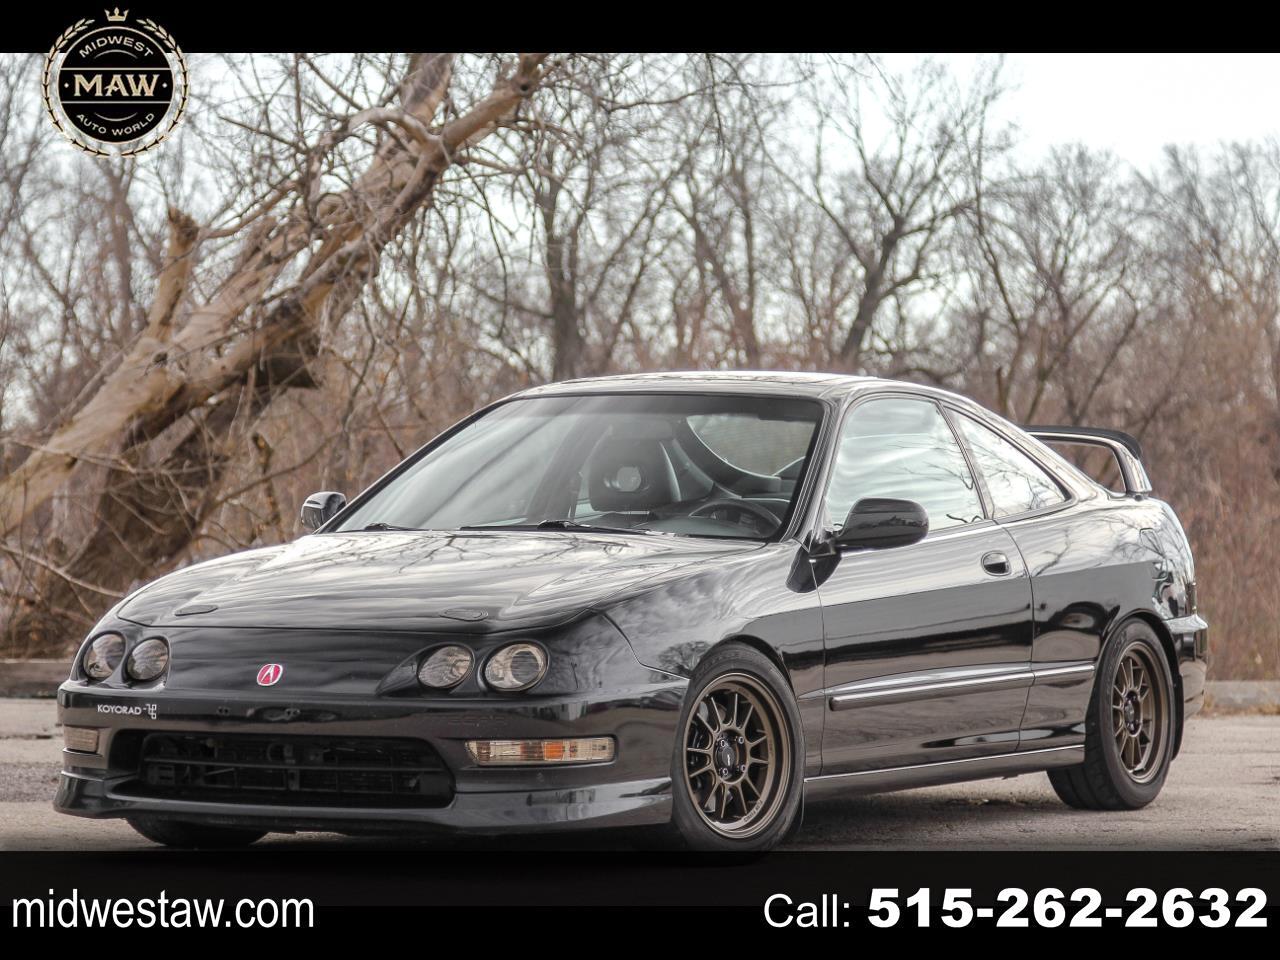 Used 01 Acura Integra Sold In Des Moines Ia Midwest Auto World Llc